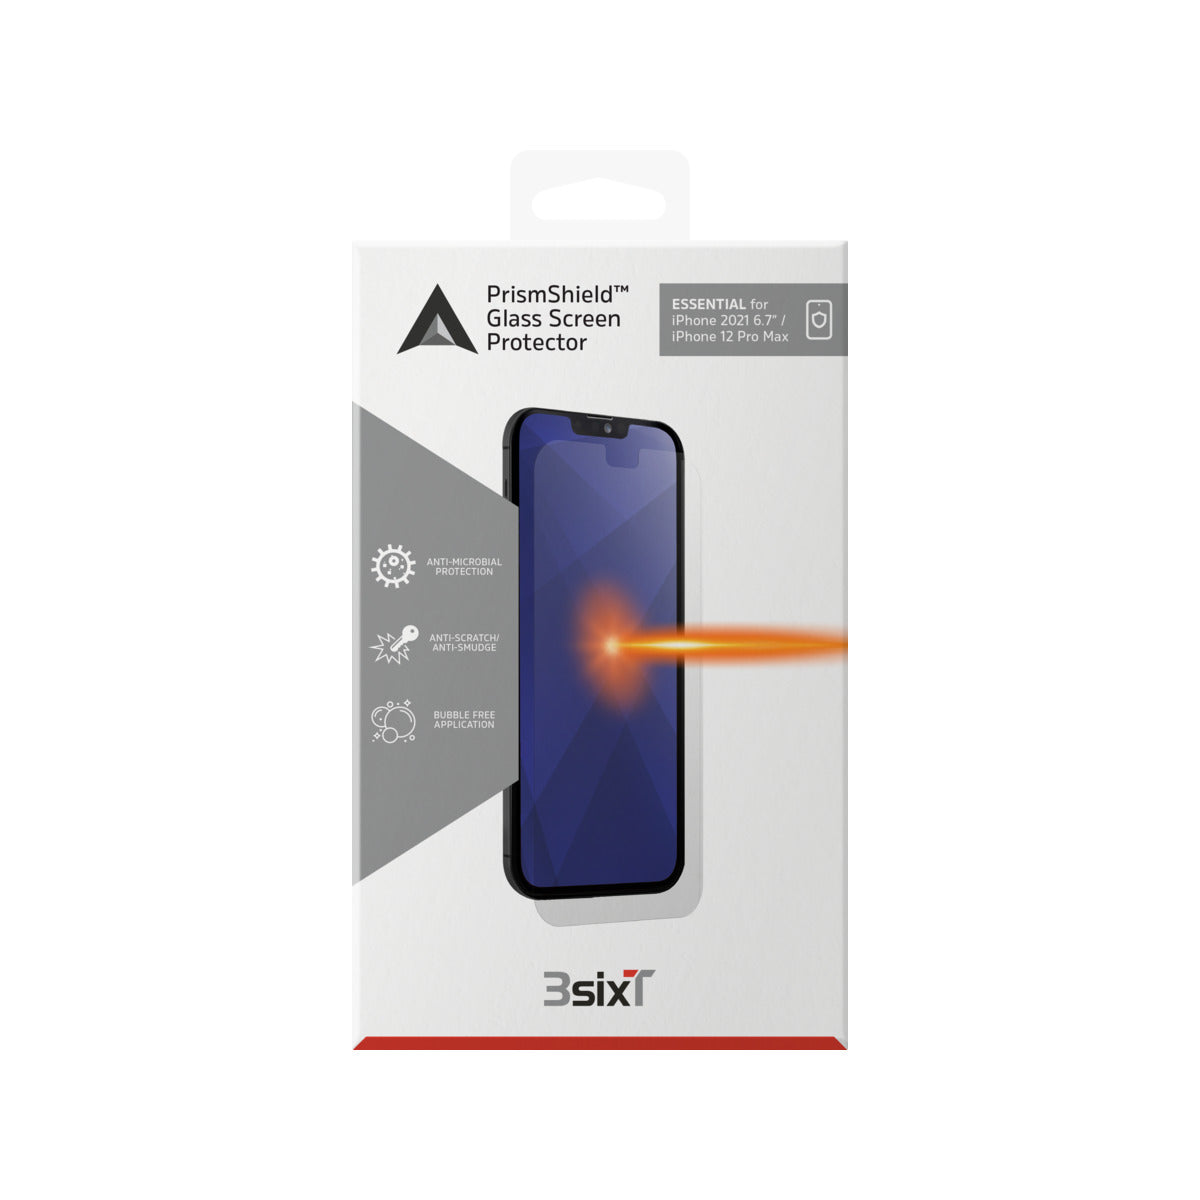 PrismShield™ Essential Glass Screen Protector for iPhone 13 Pro Max.